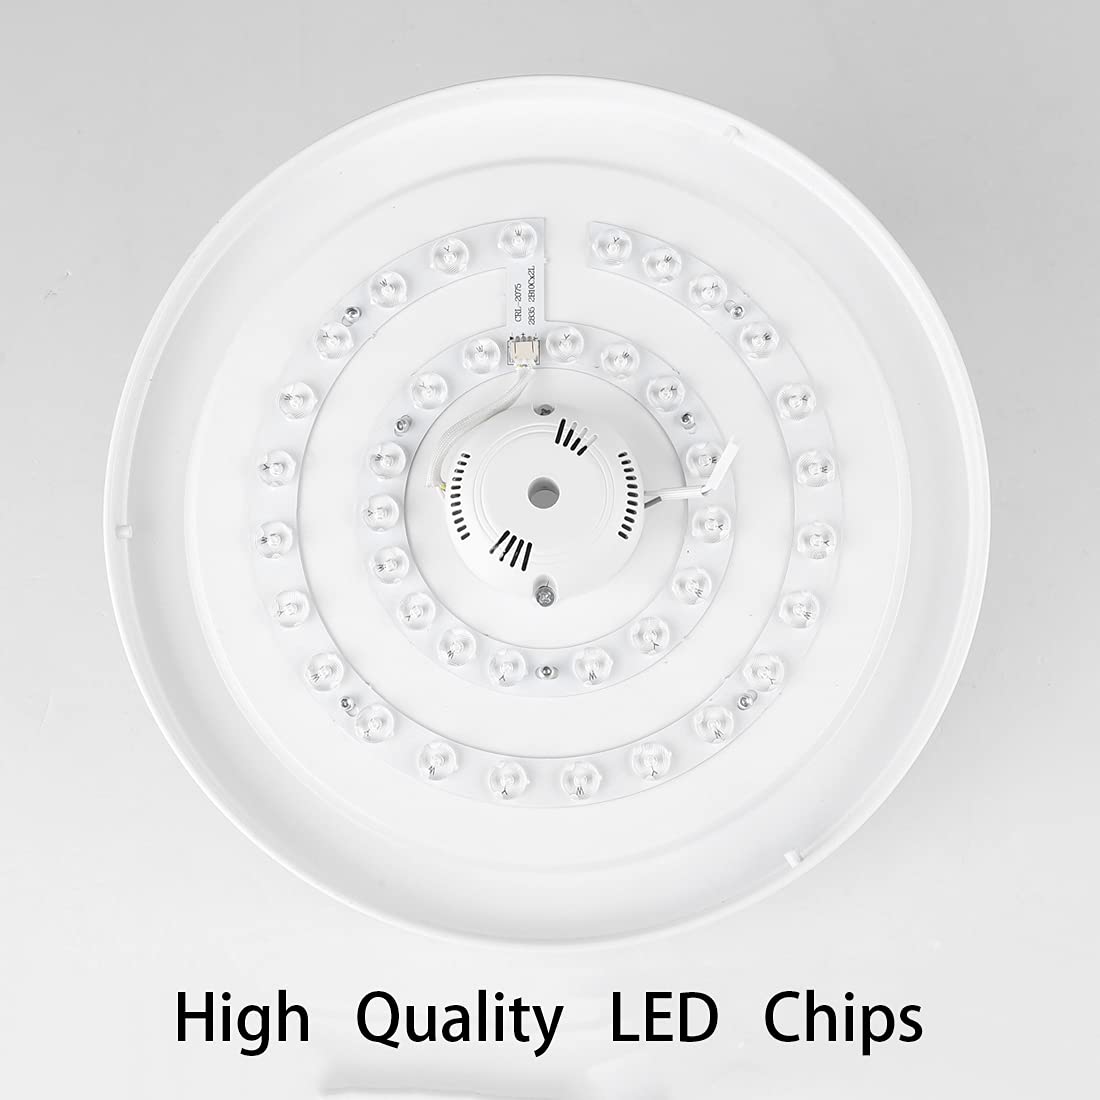 Crystal Flush Mount LED Ceiling Light Fixture,35W 14.9 in, Warm White/Day Light/ Cool White Adjustable Ceiling Light with Remote Control，Dimmable Lighting Fixture for Bedroom, Dining Room, Hallway